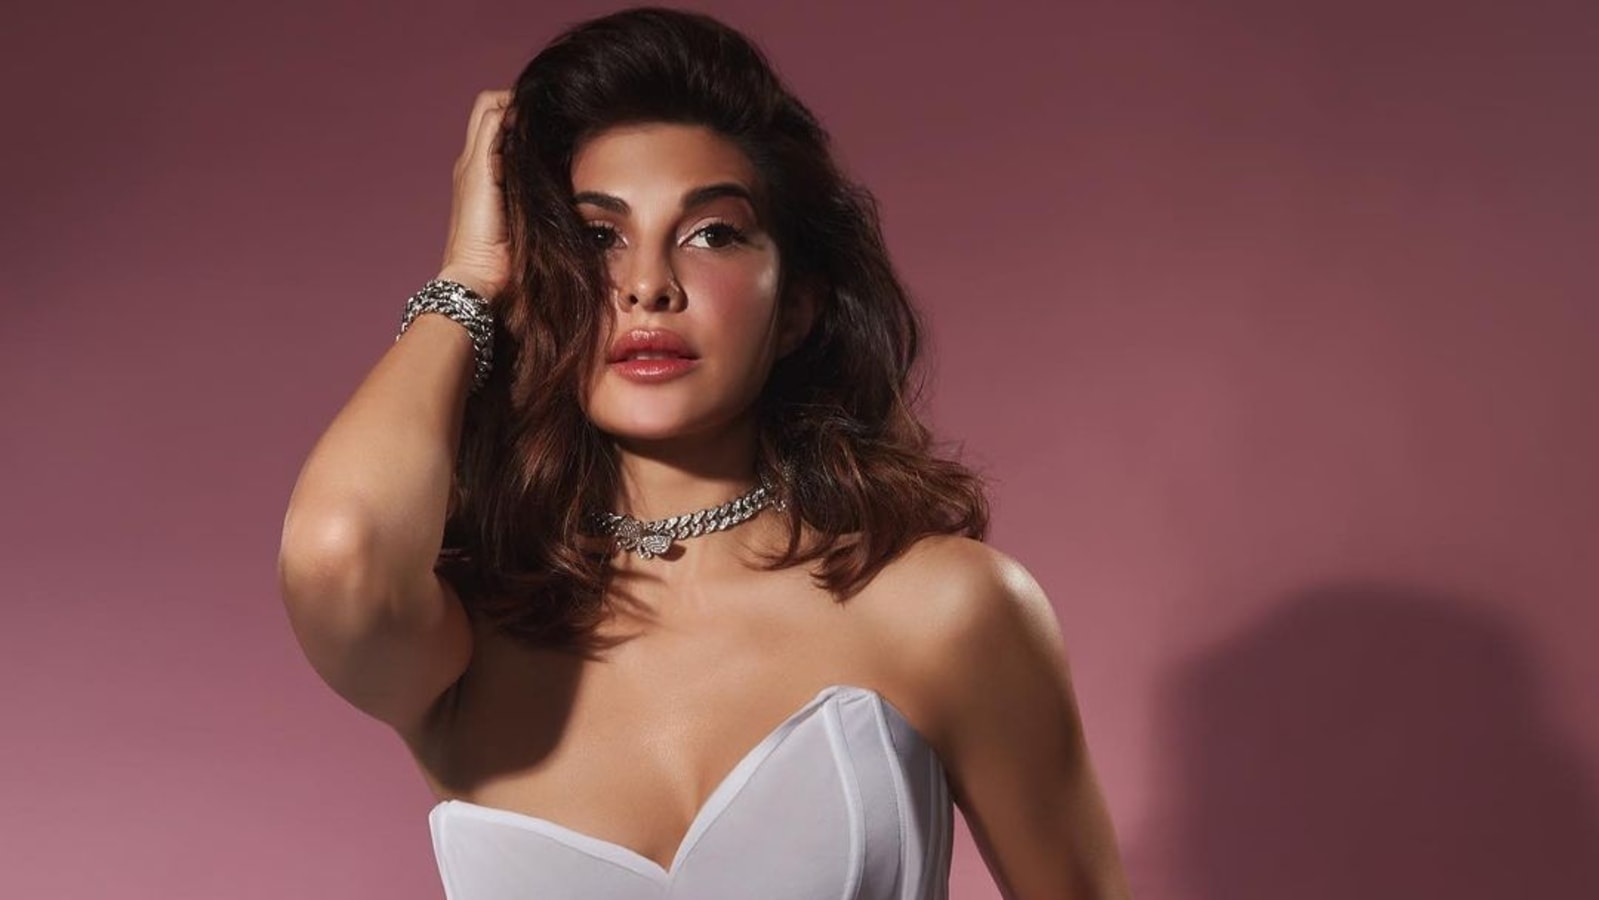 Jacqueline Fernandez ‘proud’ as she shares first poster of her Hollywood film Tell It Like A Woman